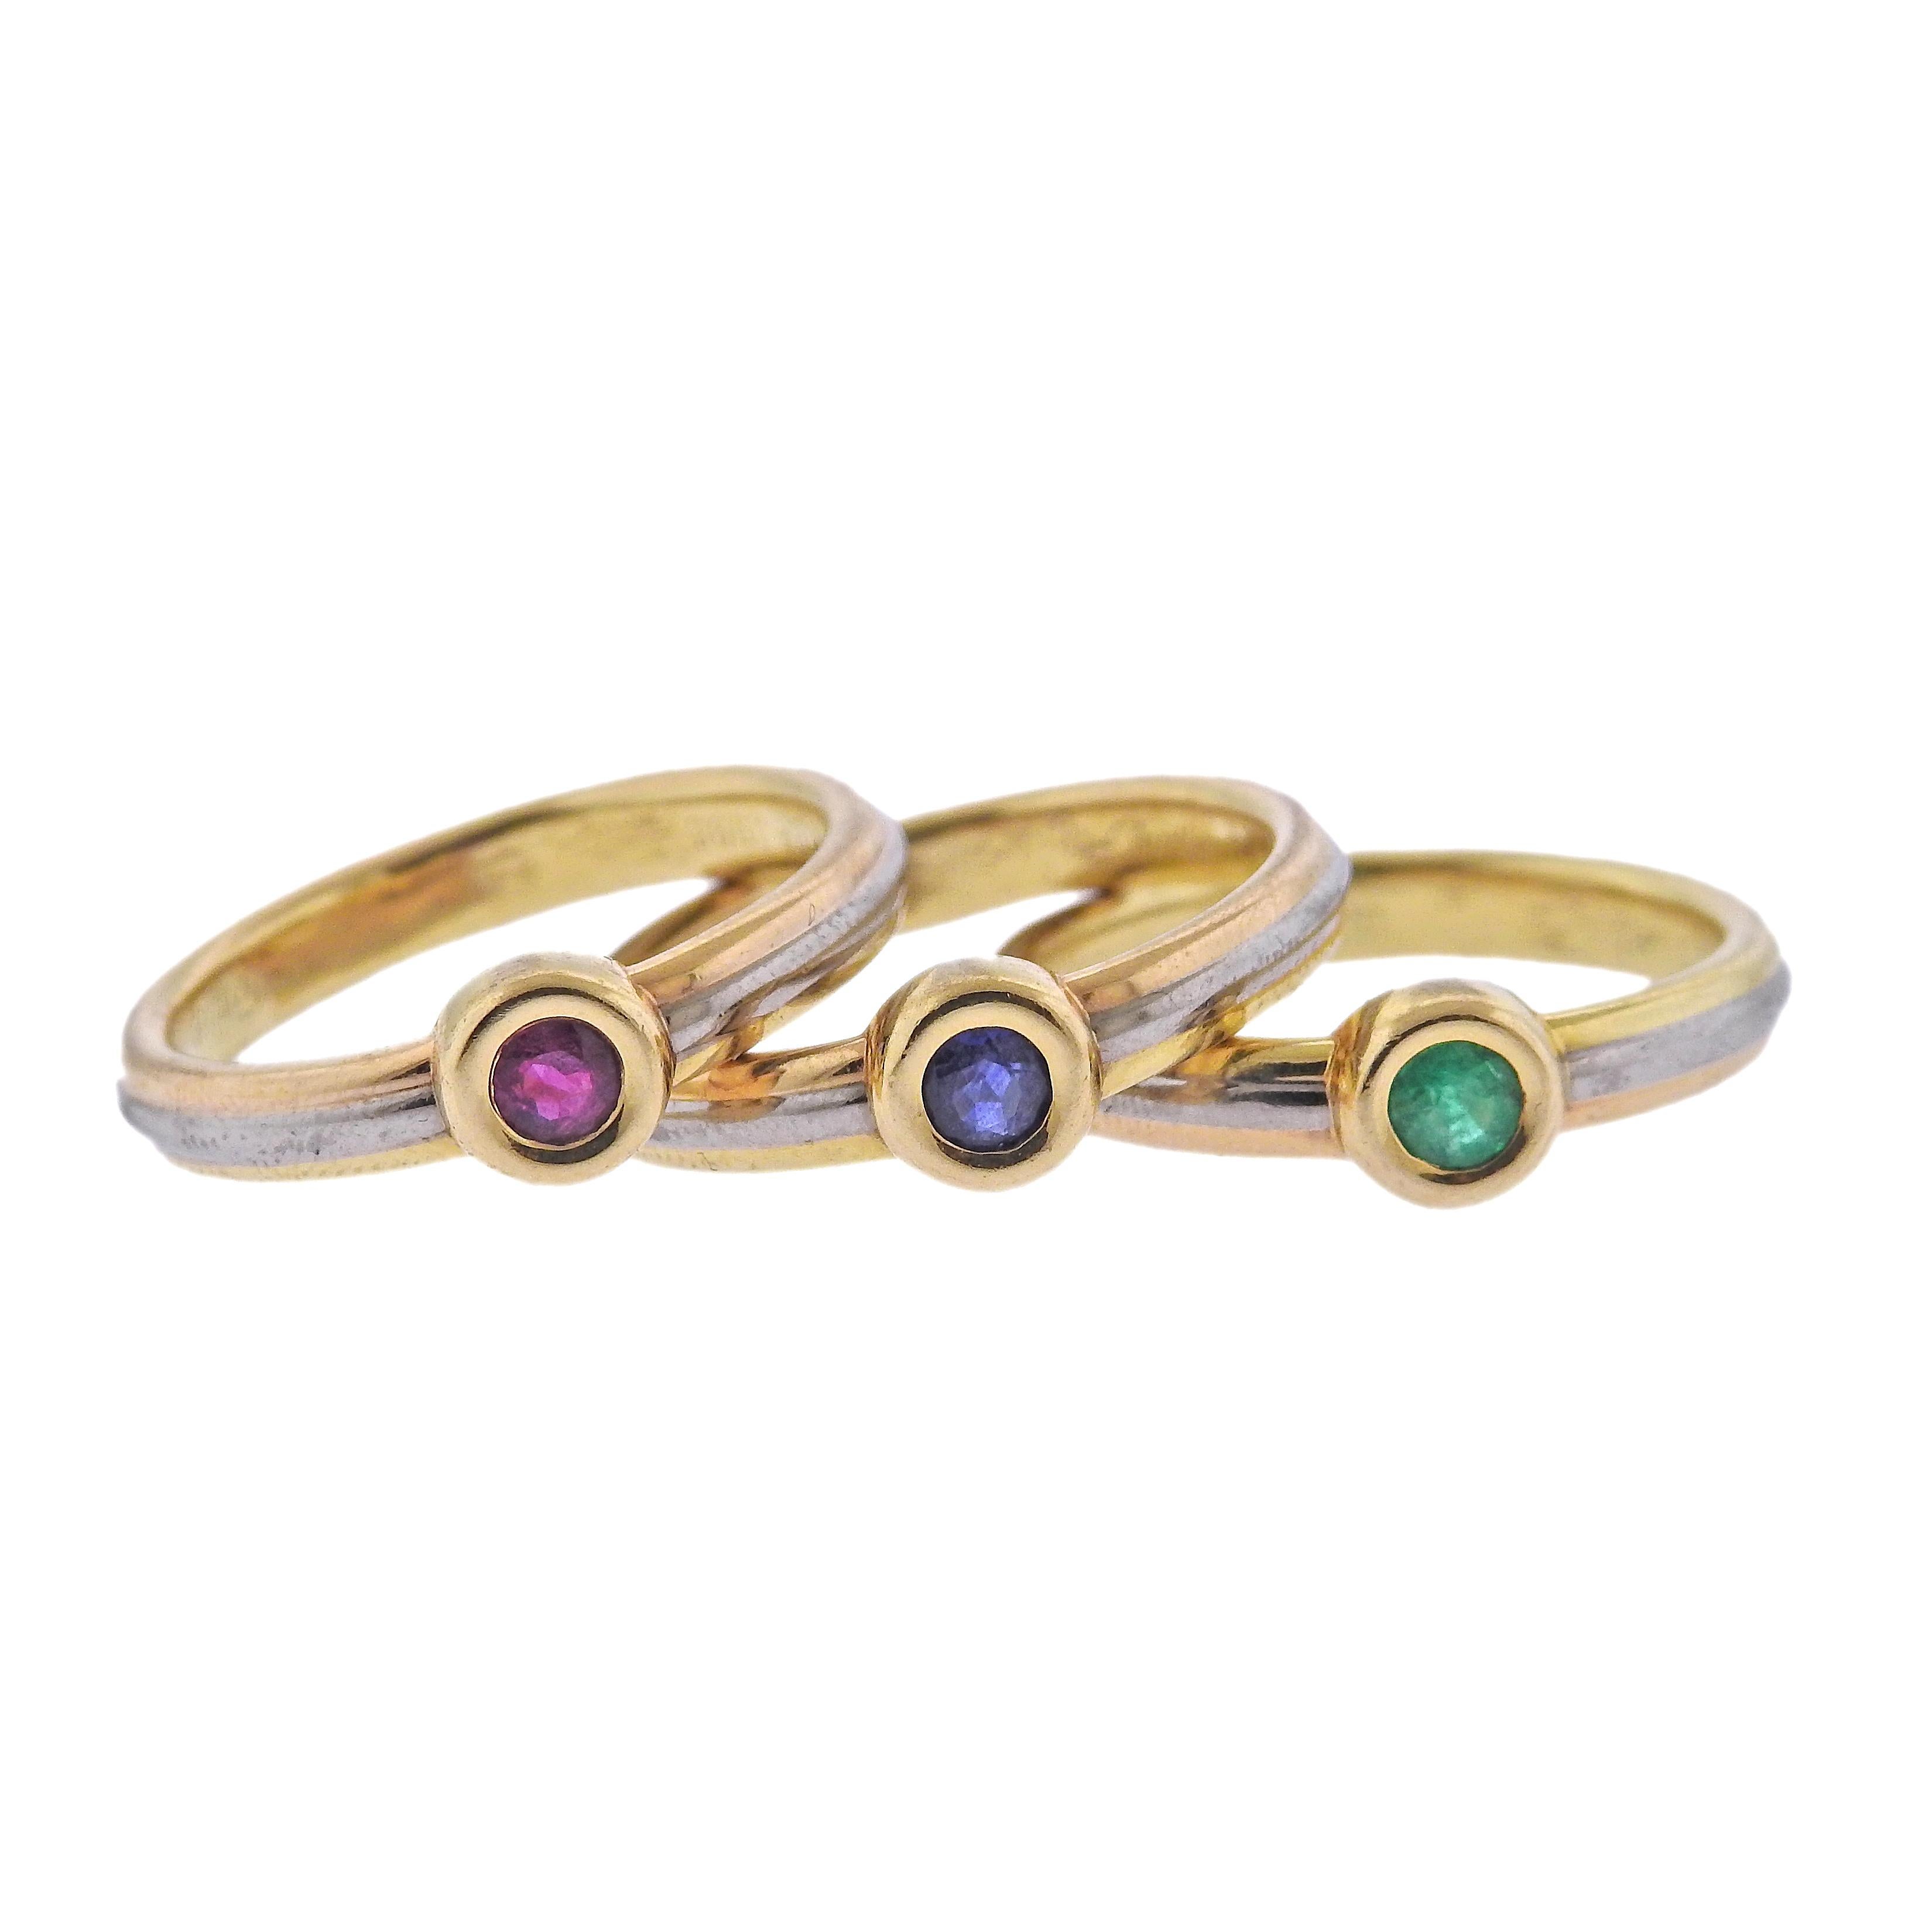 Set of three 18k gold Trinity Cartier rings, each set with a gemstone - ruby, sapphire and emerald.  Each ring is size 8, top is 6mm in diameter. Marked: Cartier, 55, 1995, D87729, E78564, D86890 (on each ring). Weight - 15.9 grams.